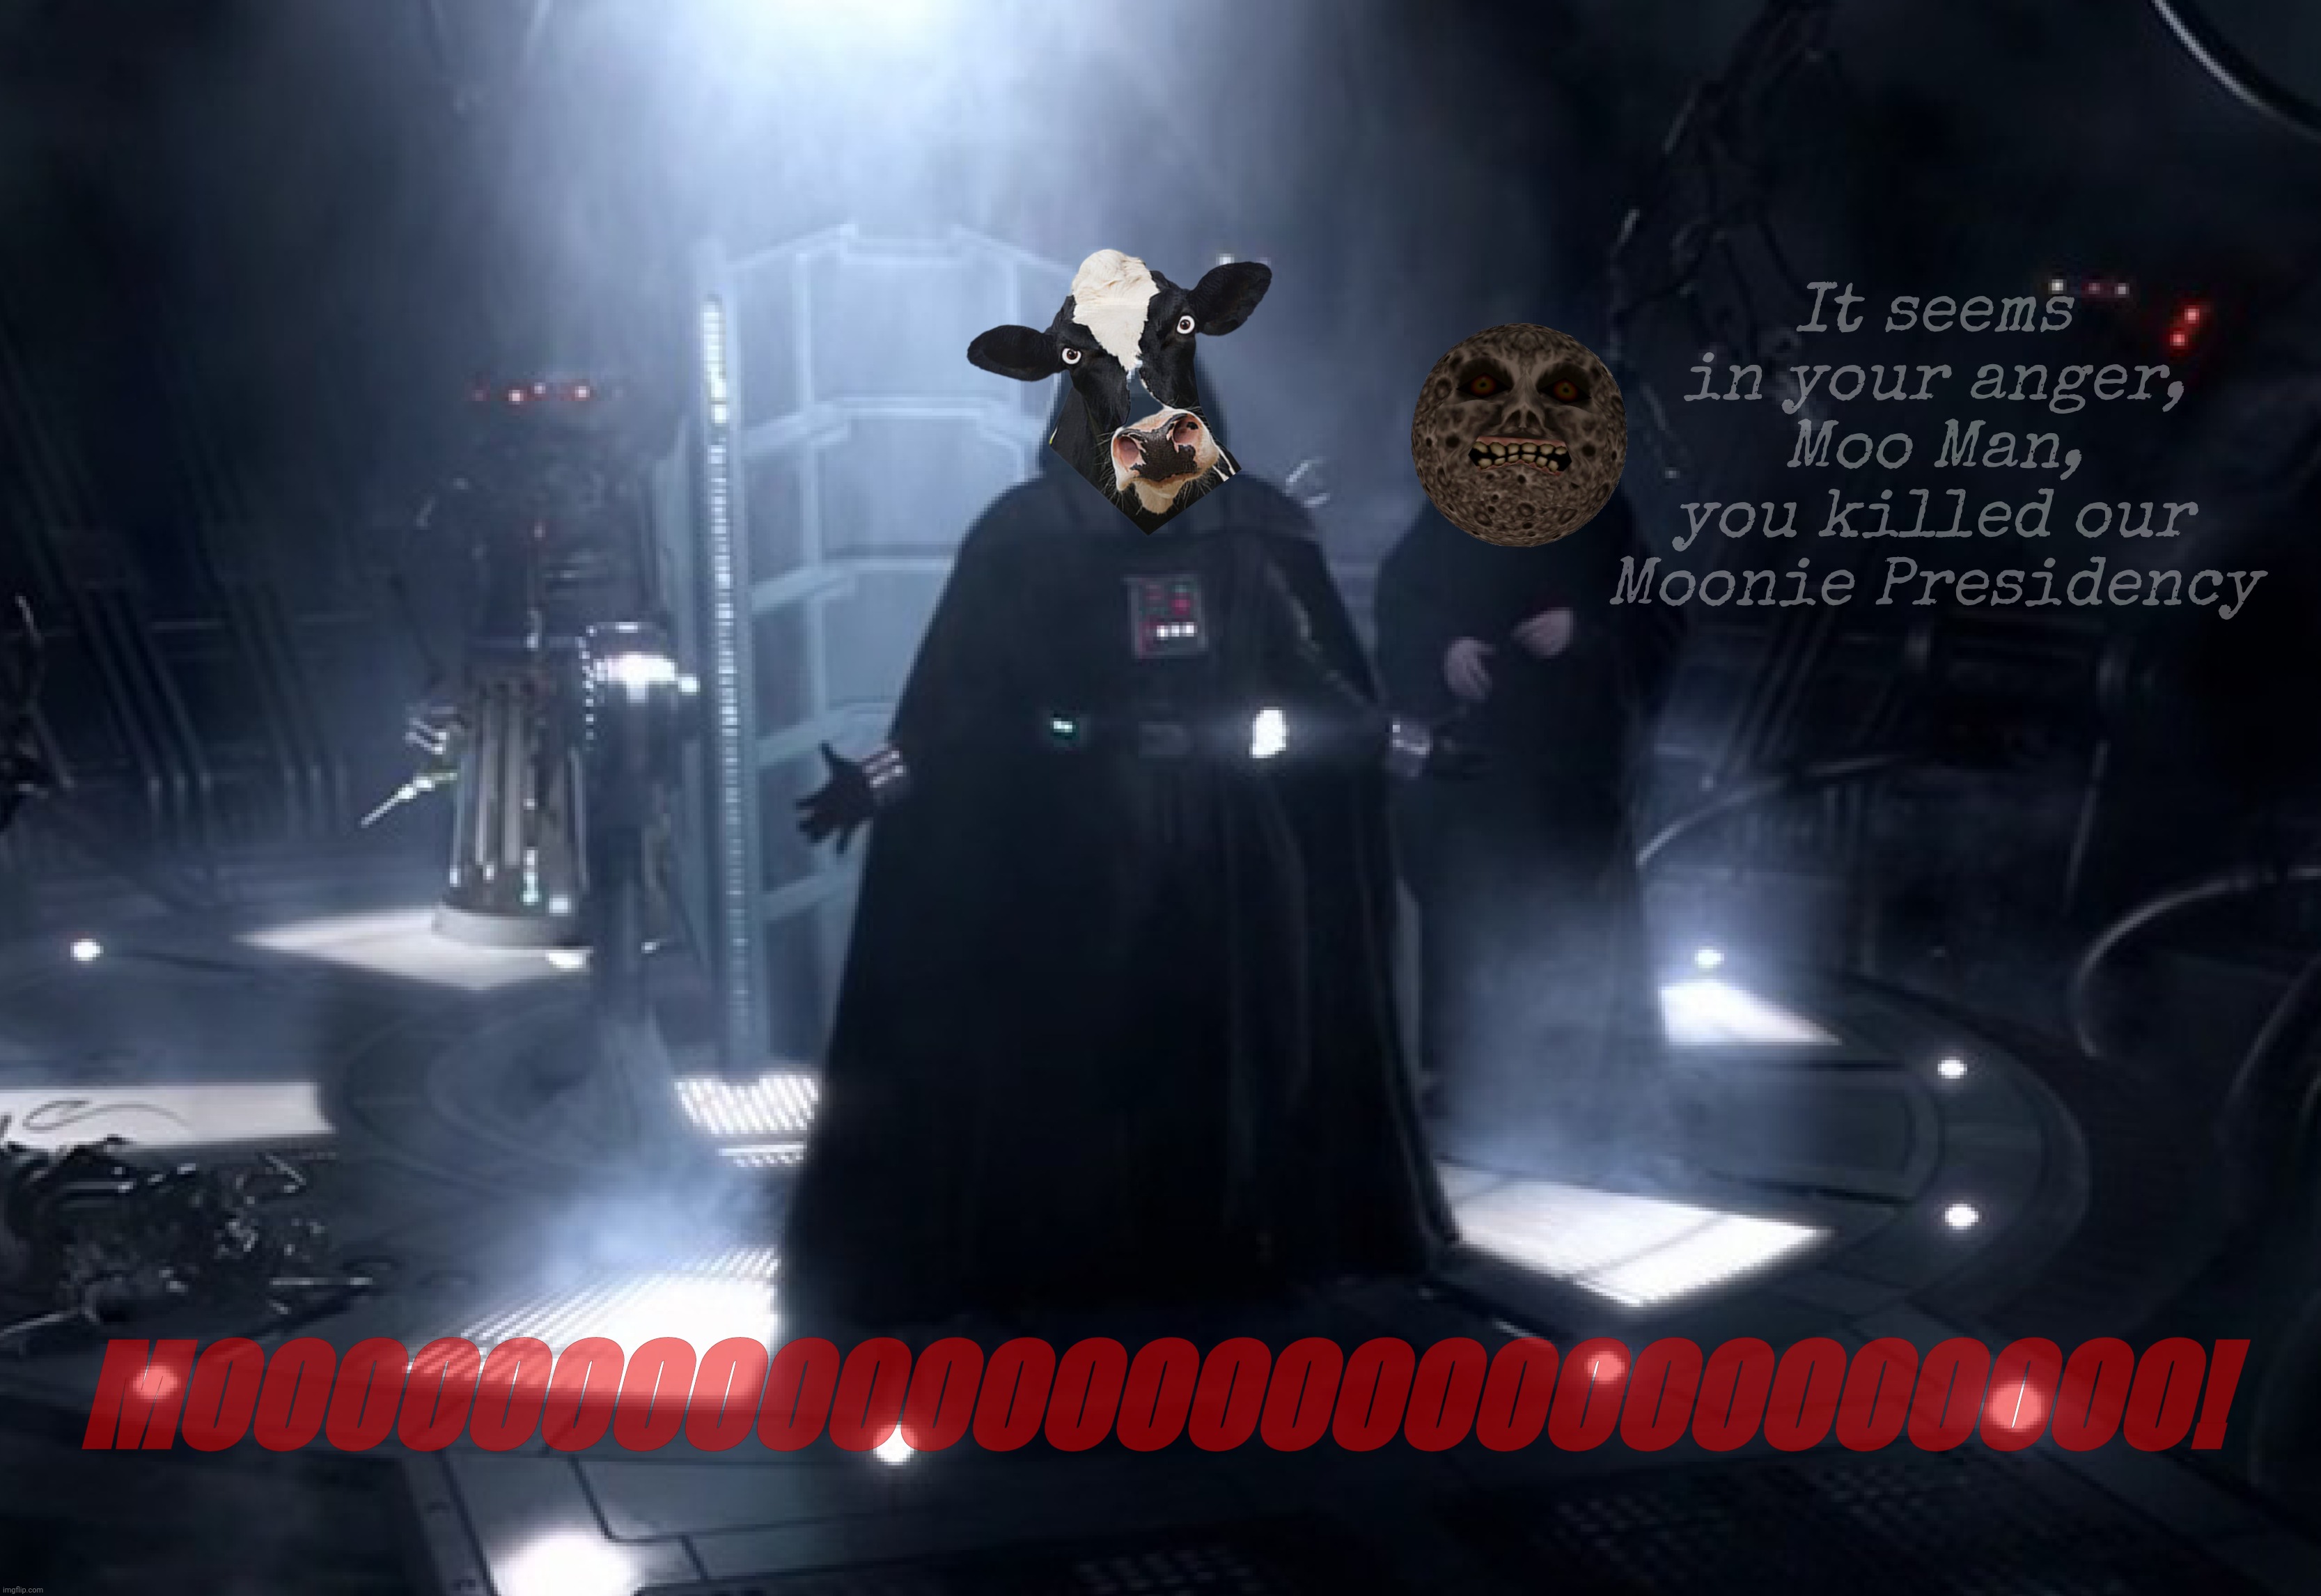 Moo Man. When Moonie's term terminated. | It seems in your anger, Moo Man,
you killed our Moonie Presidency MOOOOOOOOOOOOOOOOOOOOOOOOOOOO! | image tagged in star wars iii revenge of the sith,moo man,moonie,lunar,it's all about thuh feelzs,so emo | made w/ Imgflip meme maker